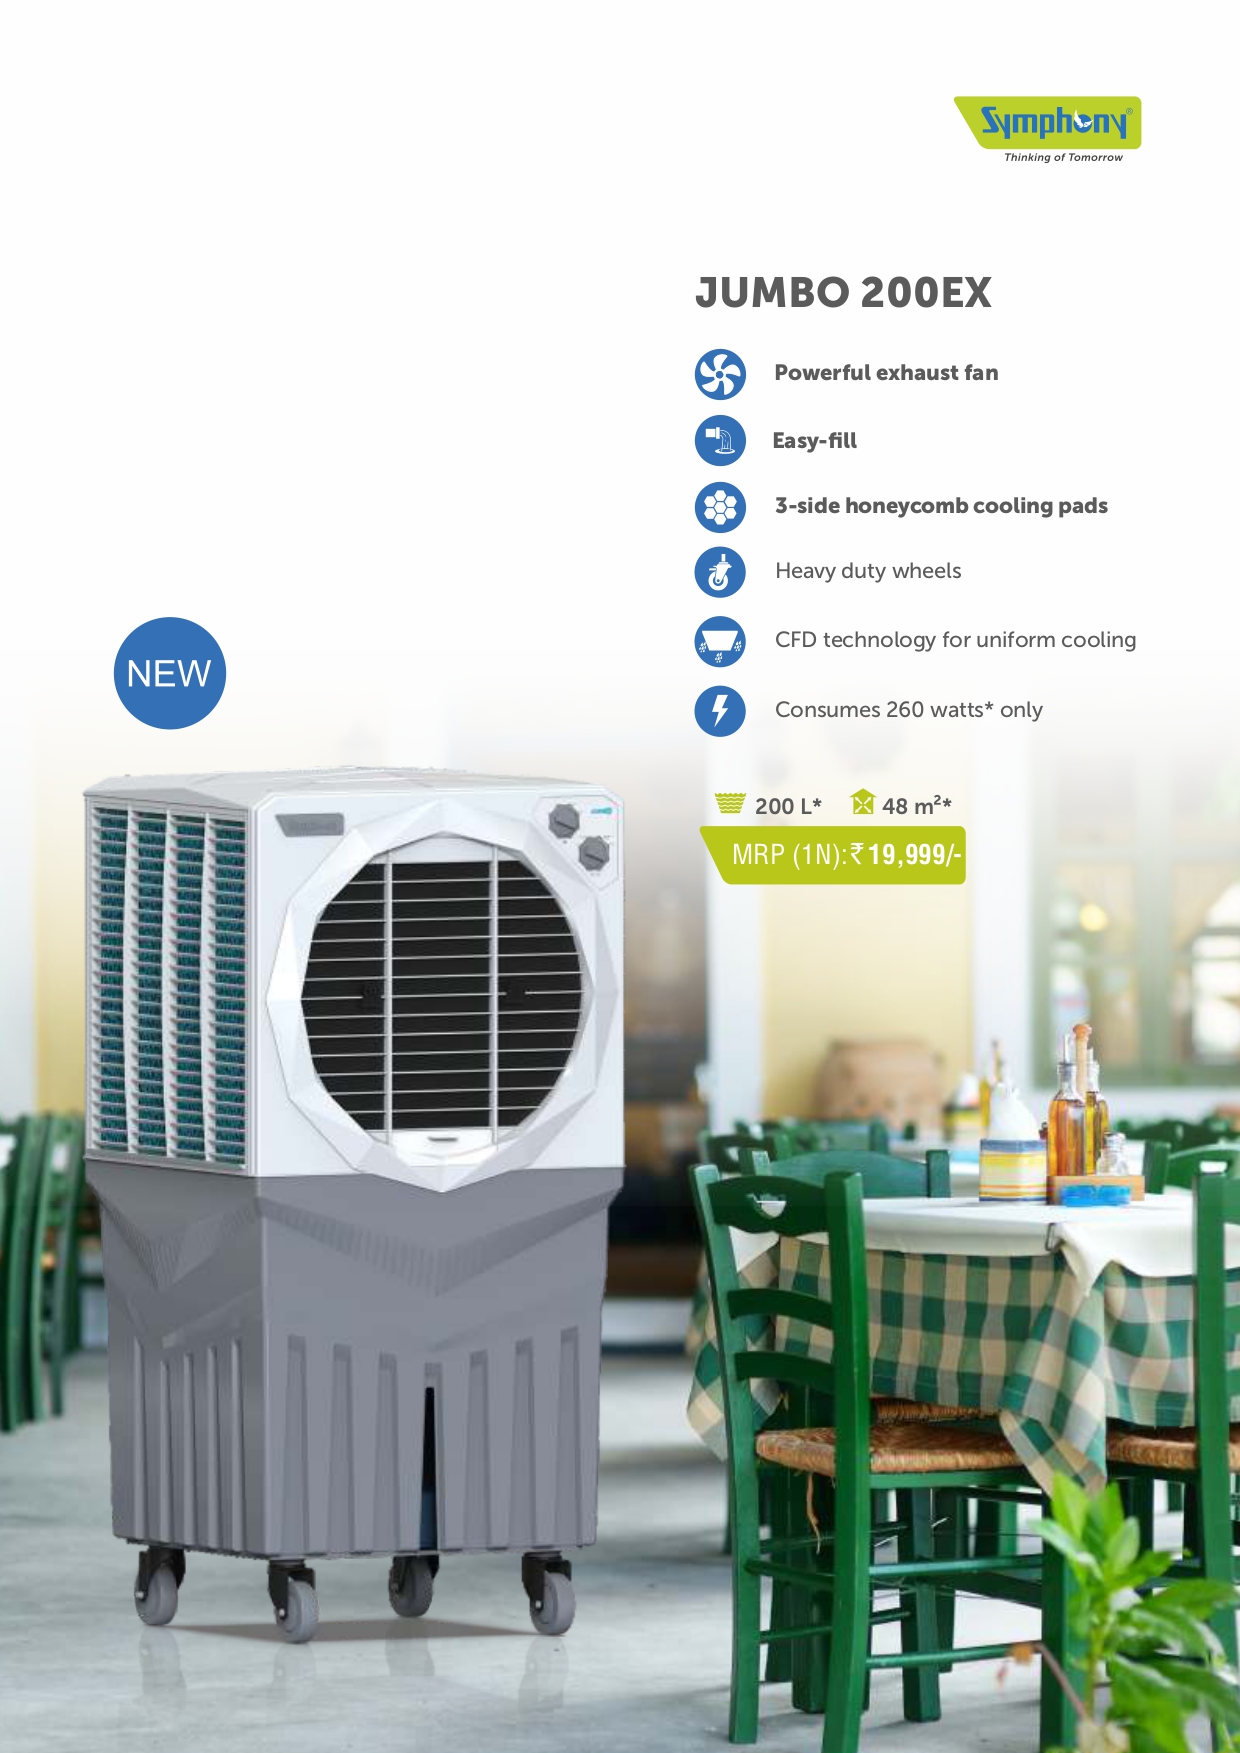 Distributor of Symphony Jumbo Coolers in Indore